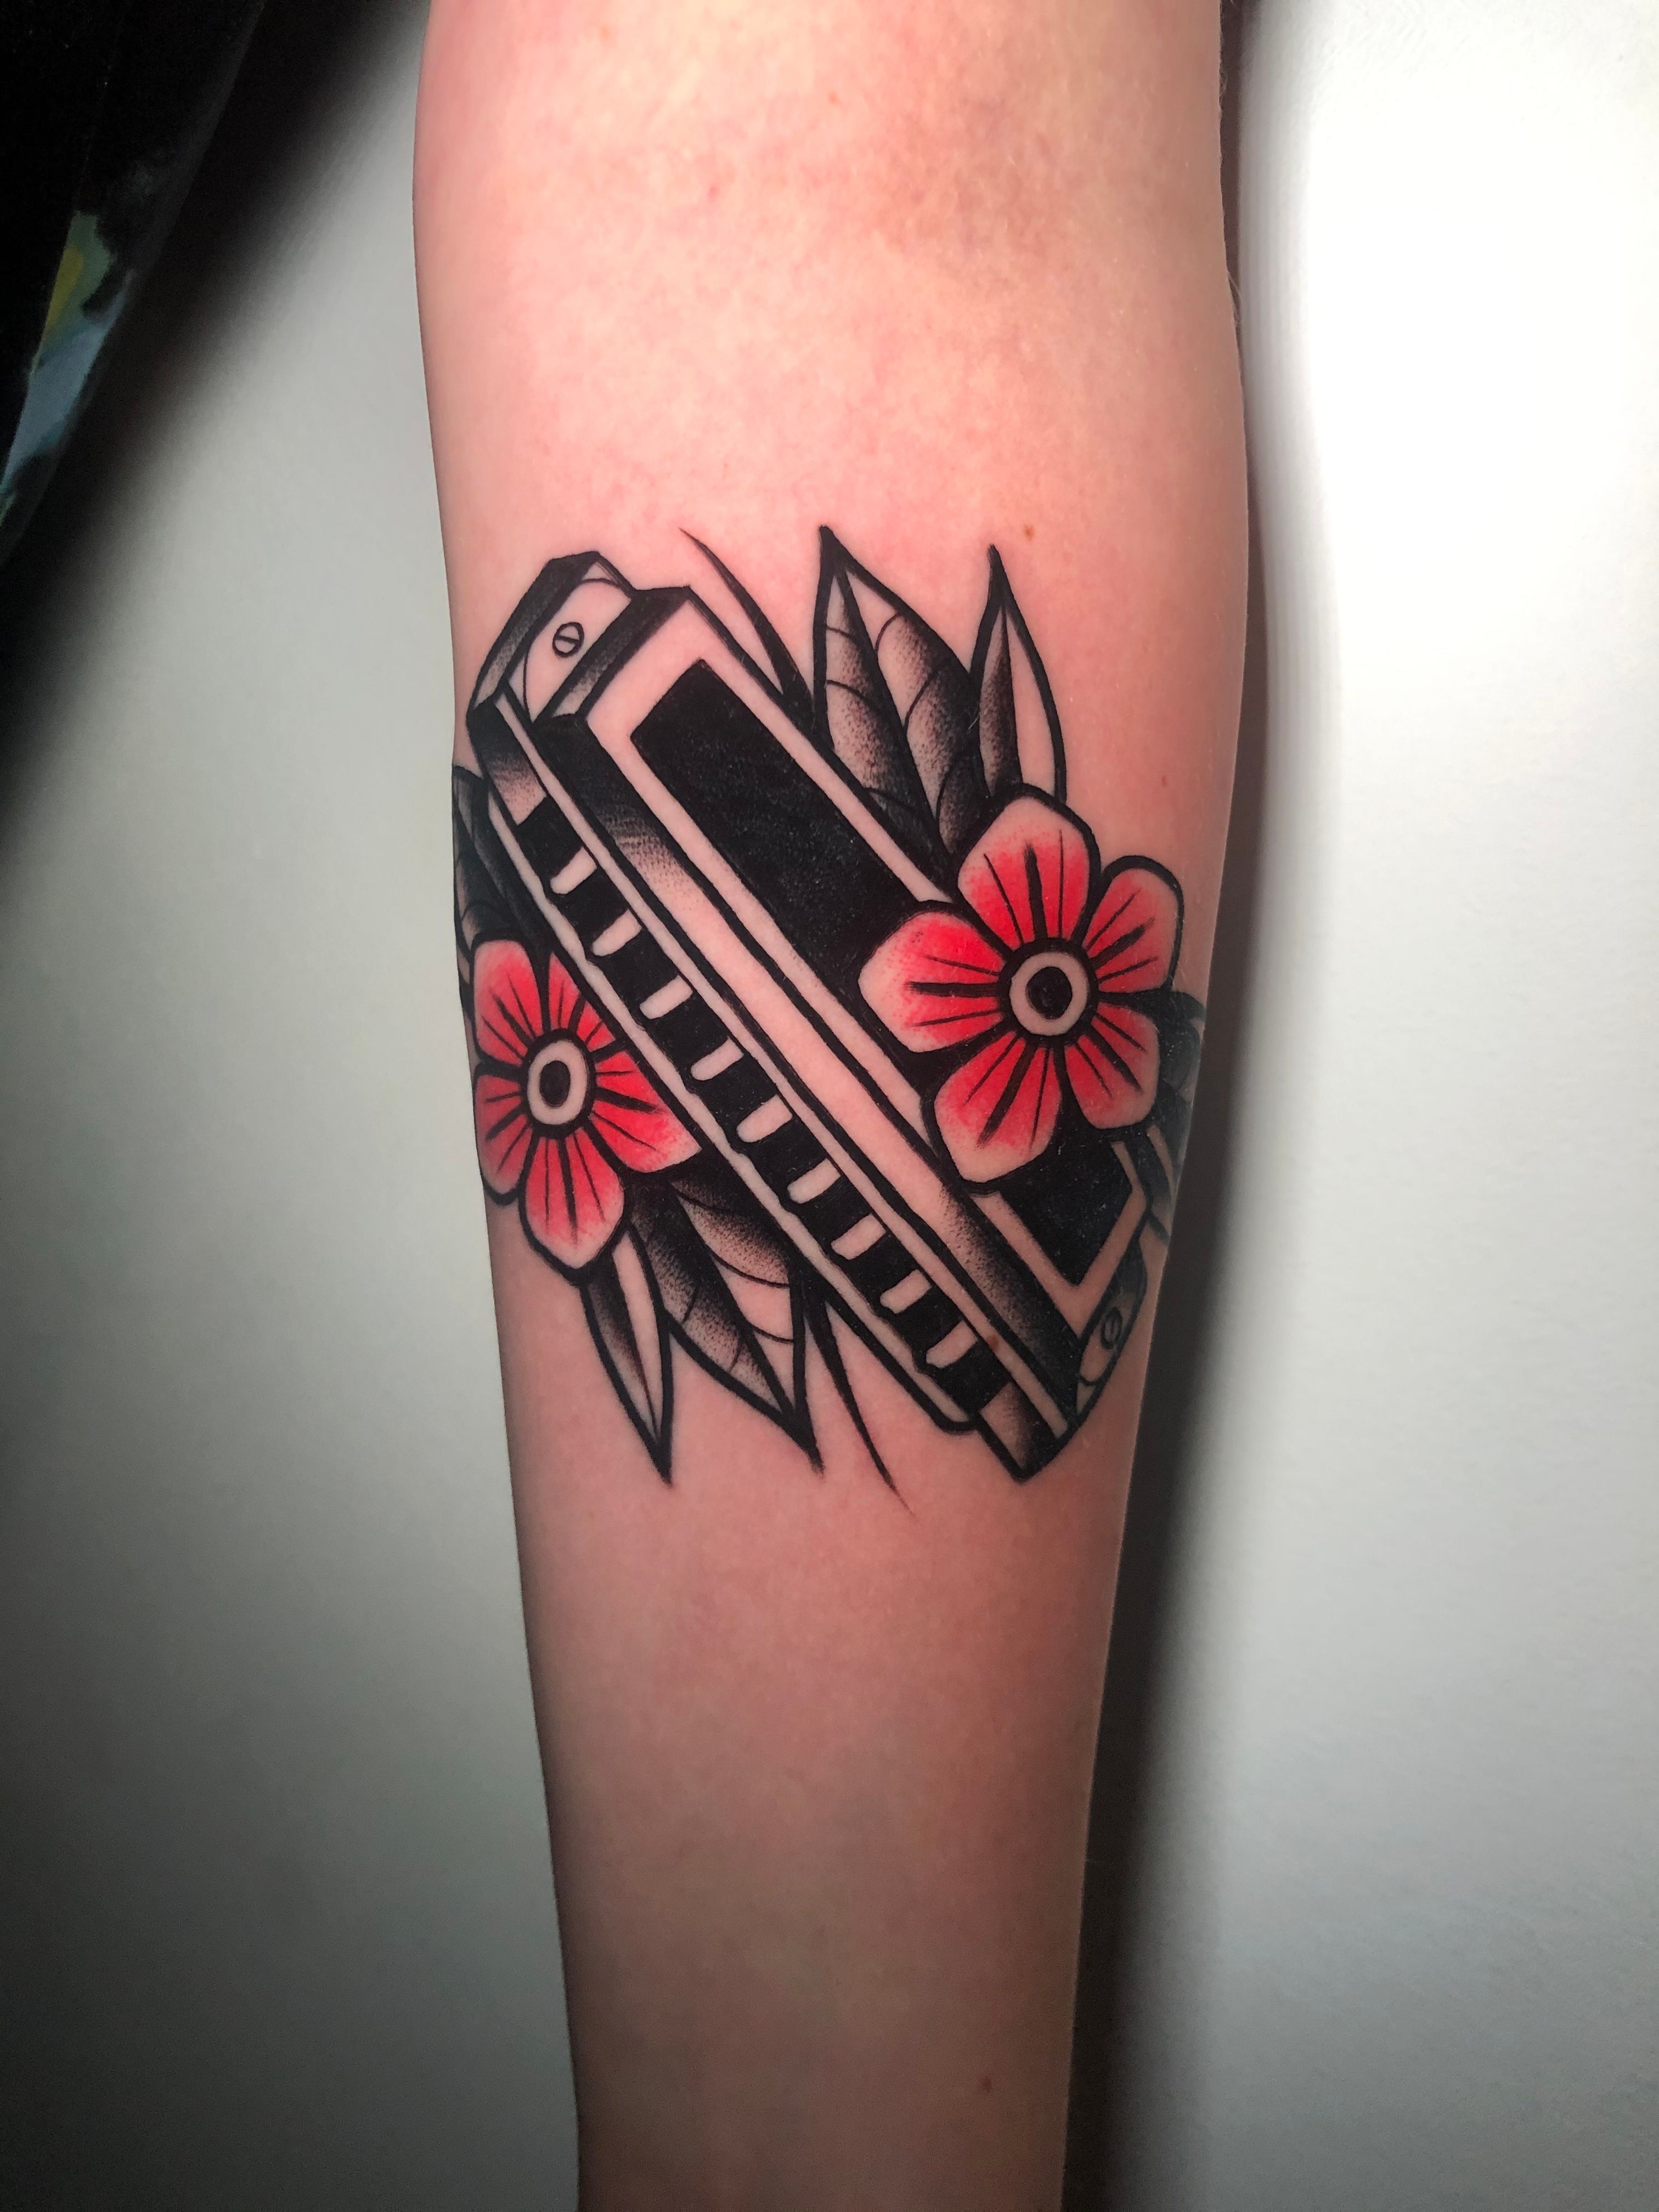 Worthey Tattoo - Added some color to the harmonica tattoo... | Facebook